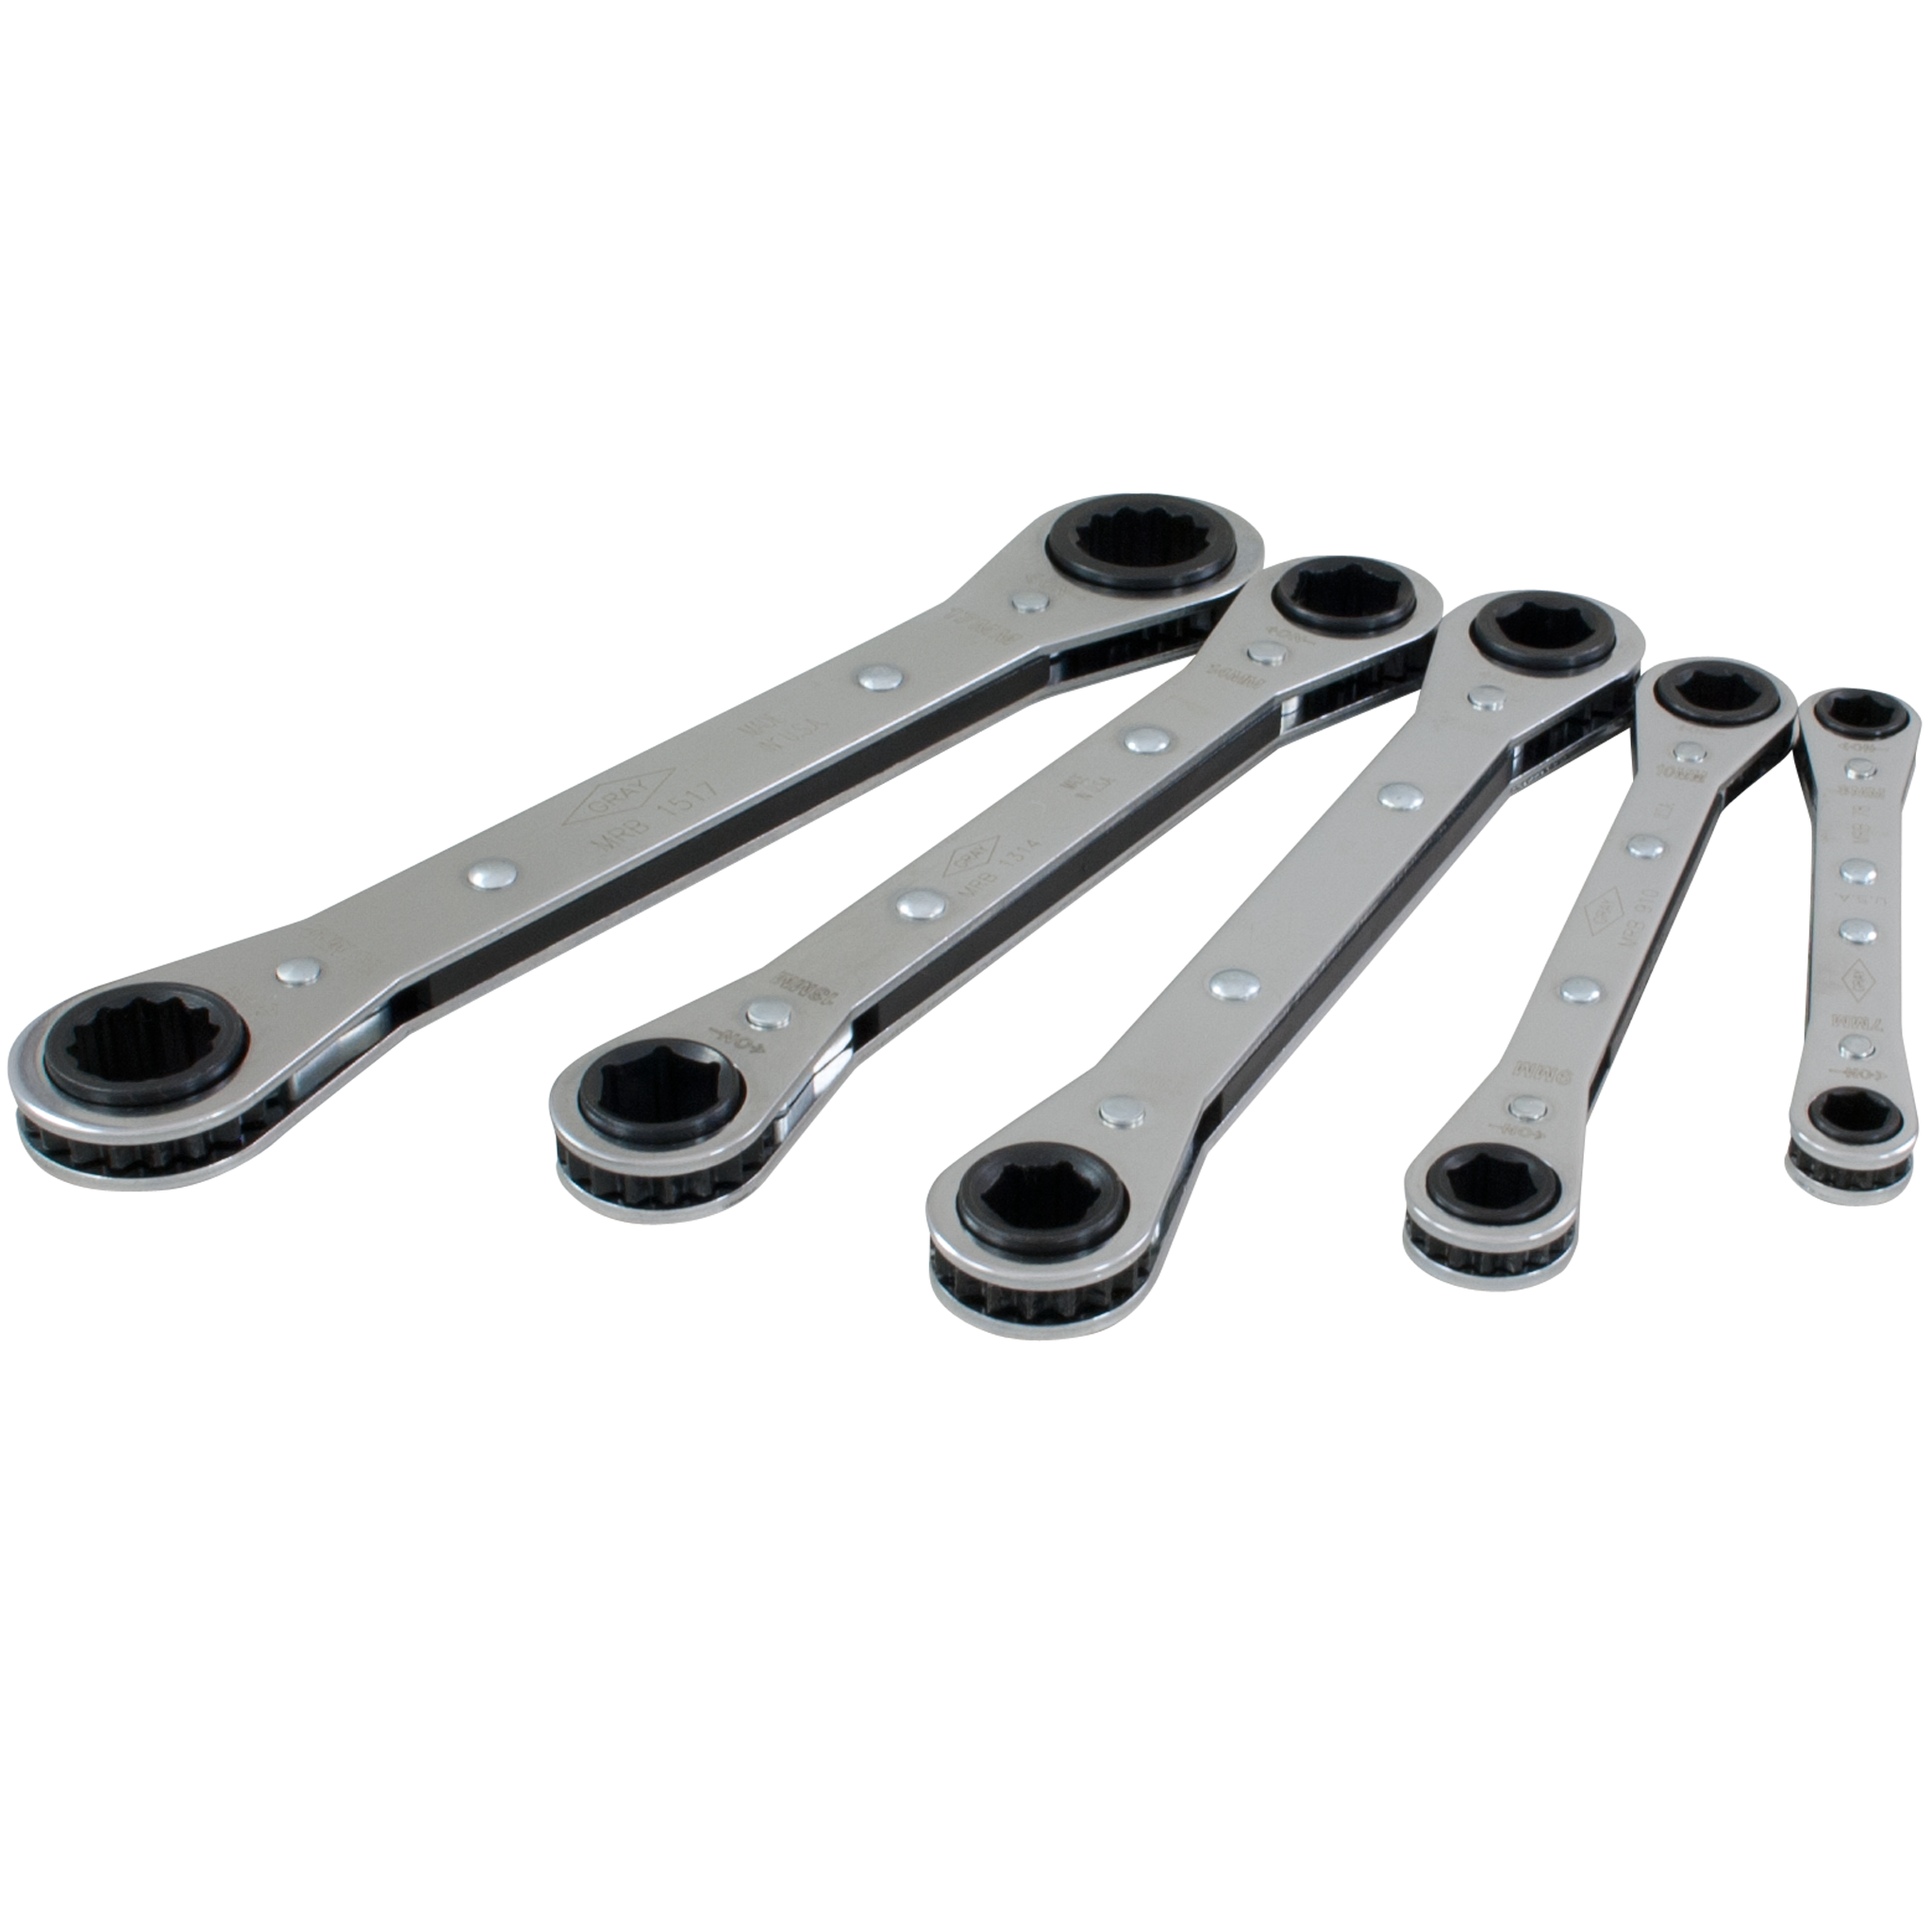 5 Piece Metric Ratcheting Box End Wrench Set